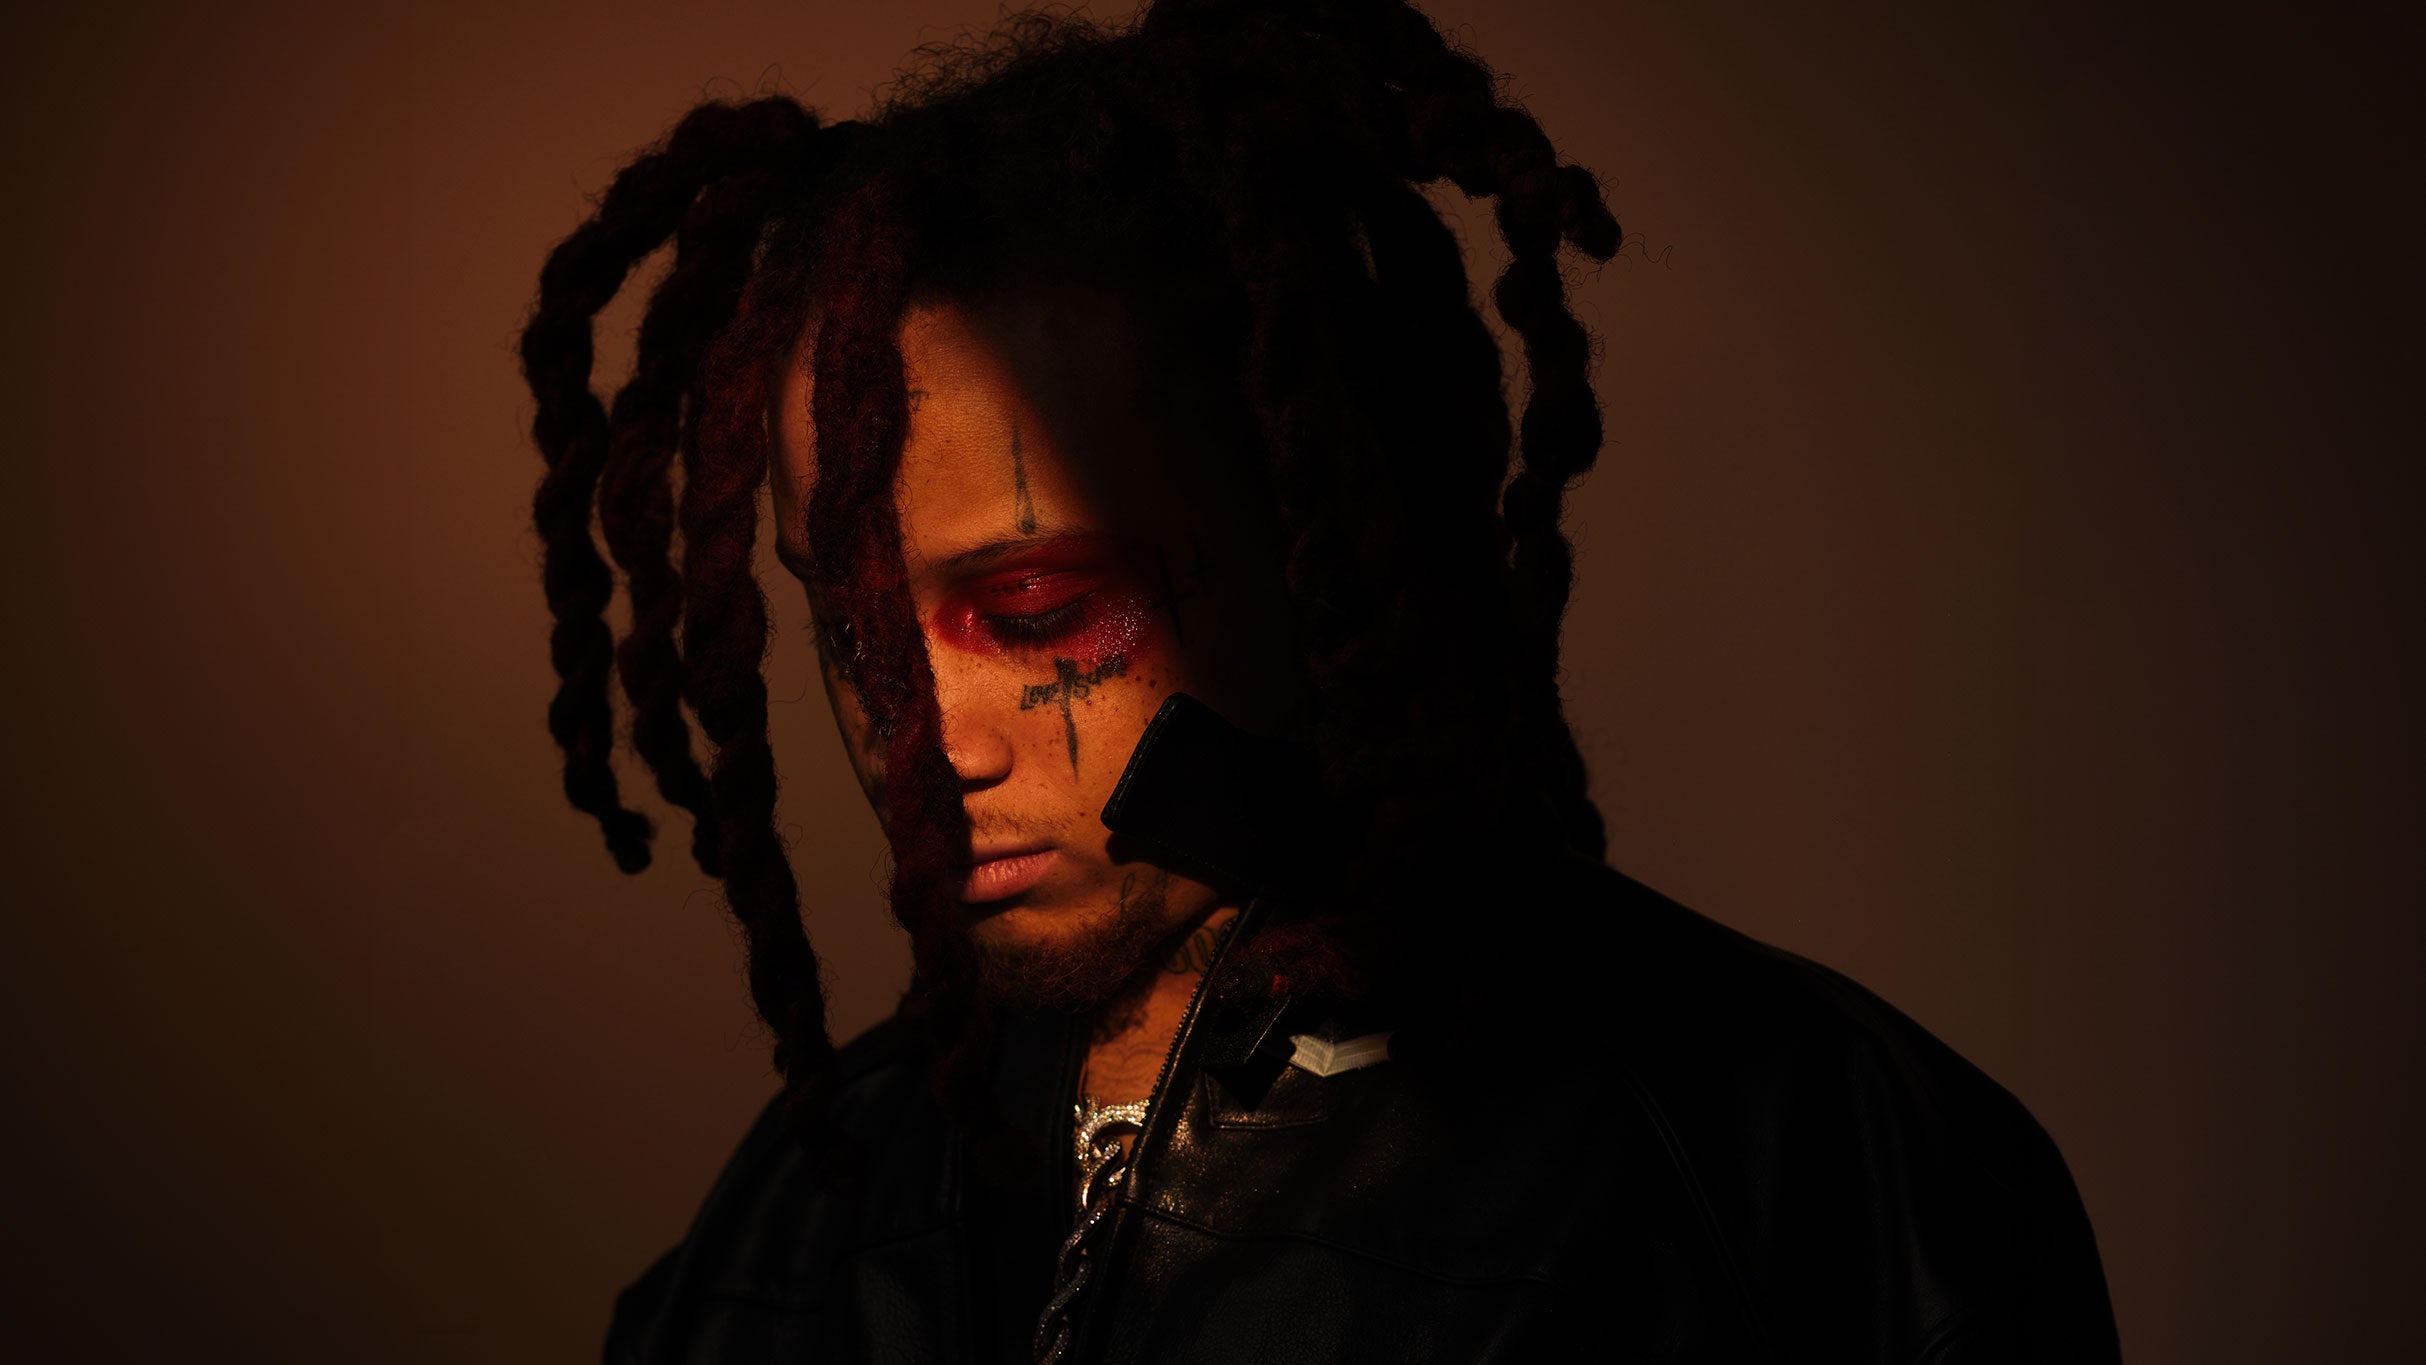 Trippie Redd - Take Me Away Tour free pre-sale password for early tickets in Toronto